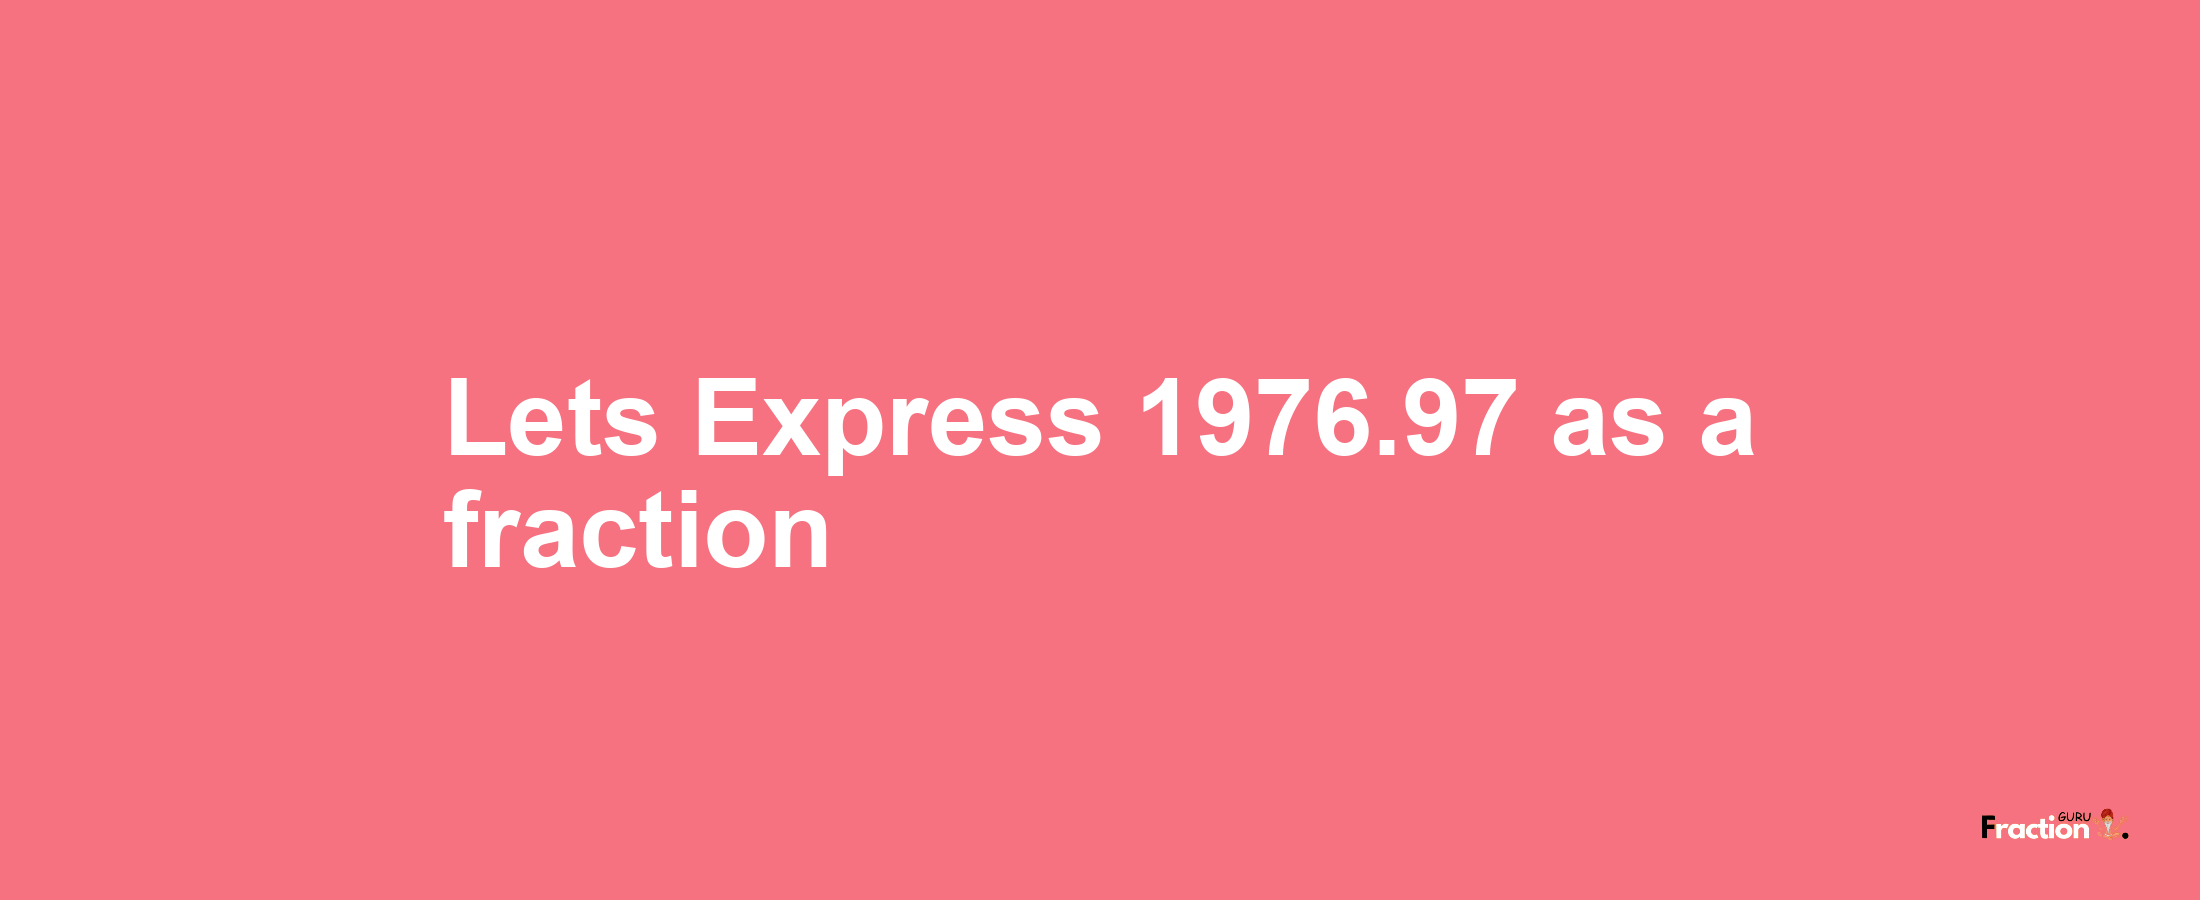 Lets Express 1976.97 as afraction